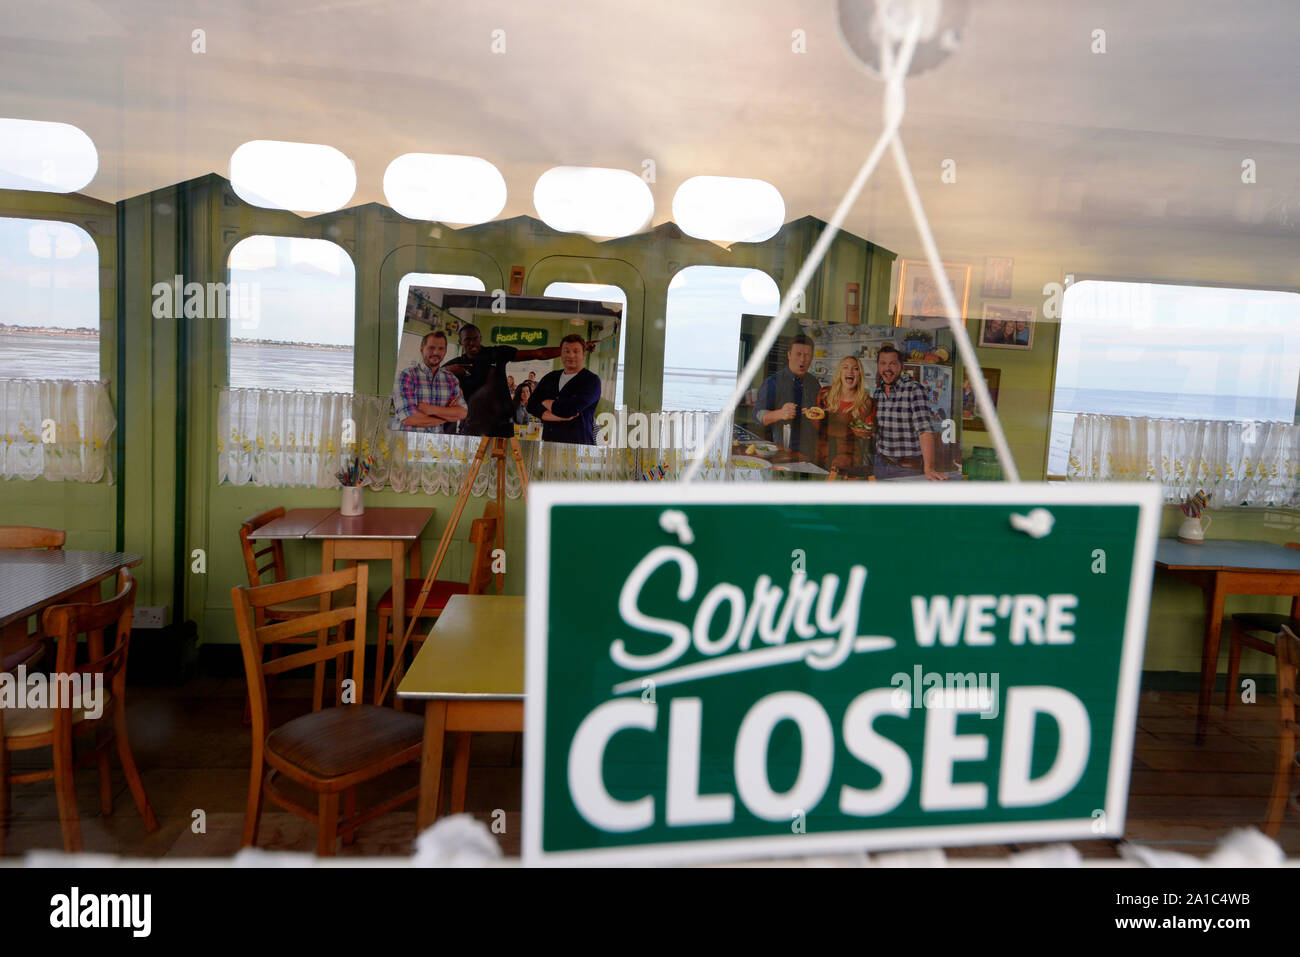 Closed sign on door of Jamie and Jimmy's cafe for filming the tv program with Jamie Oliver and Jimmy Doherty on Southend Pier, Essex, UK. Huts Stock Photo